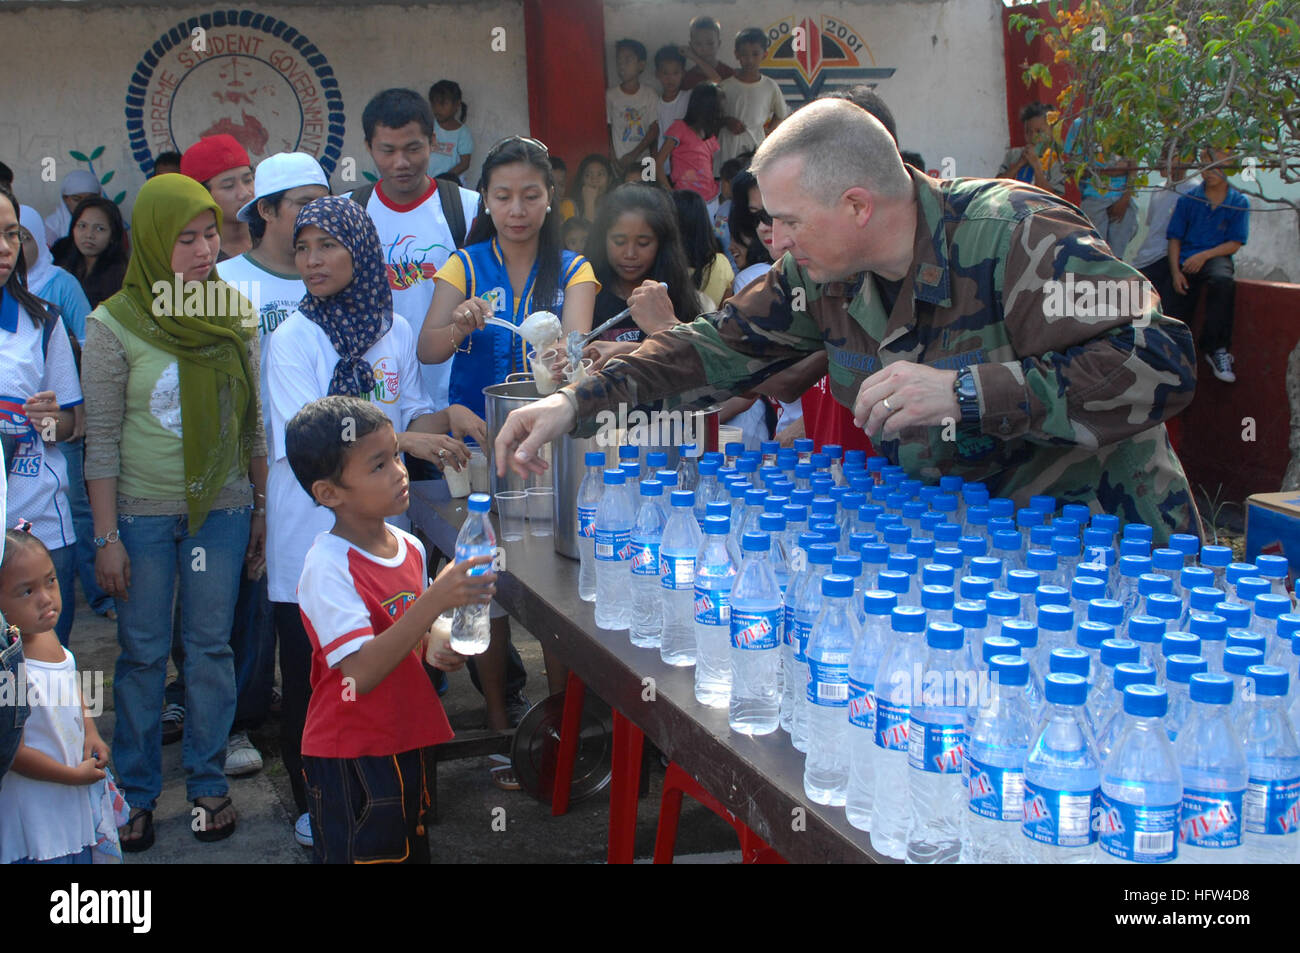 071215-N-7286M-033 ZAMBOANGA CITY, Philippines (Dec. 15, 2007) U.S. Air Force Chaplin, Maj. Philip G. Houser hands out water to the children at MEIN College. Sailors, Airmen and Soldiers assigned to Joint Special Operations Task Force-Philippines (JSOTF-P) assisted MEIN College, INC. and the Kiwanis Club of METRO Zamboanga in handing out presents for the Holidays at the as part of their annual community outreach program.  U.S. Navy photo by Mass Communication Specialist 1st Class Daniel R. Mennuto (Released) US Navy 071215-N-7286M-033 U.S. Air Force Chaplain, Maj. Philip G. Houser hands out wa Stock Photo